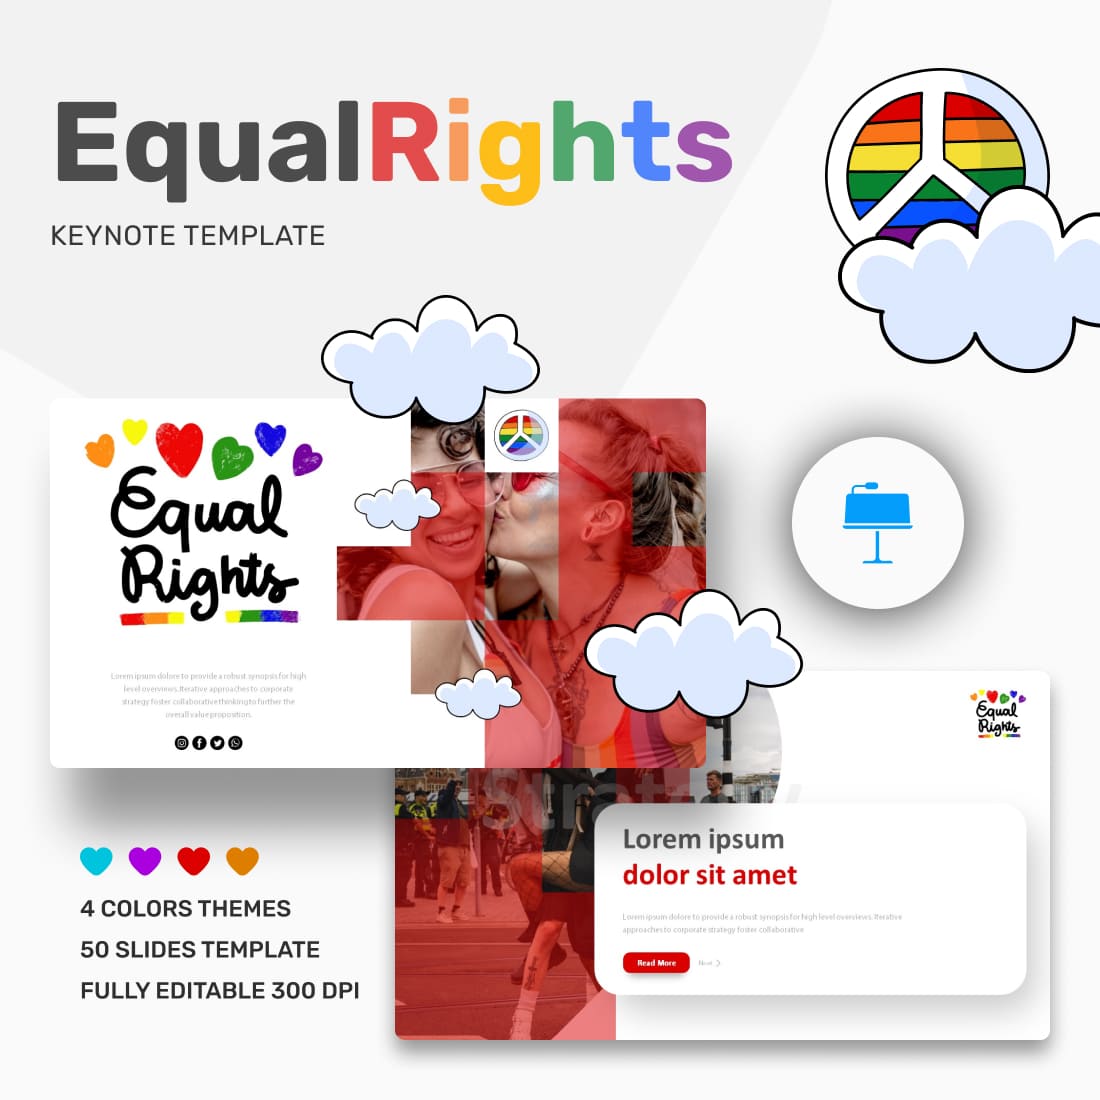 Equal Rights Keynote Template cover.